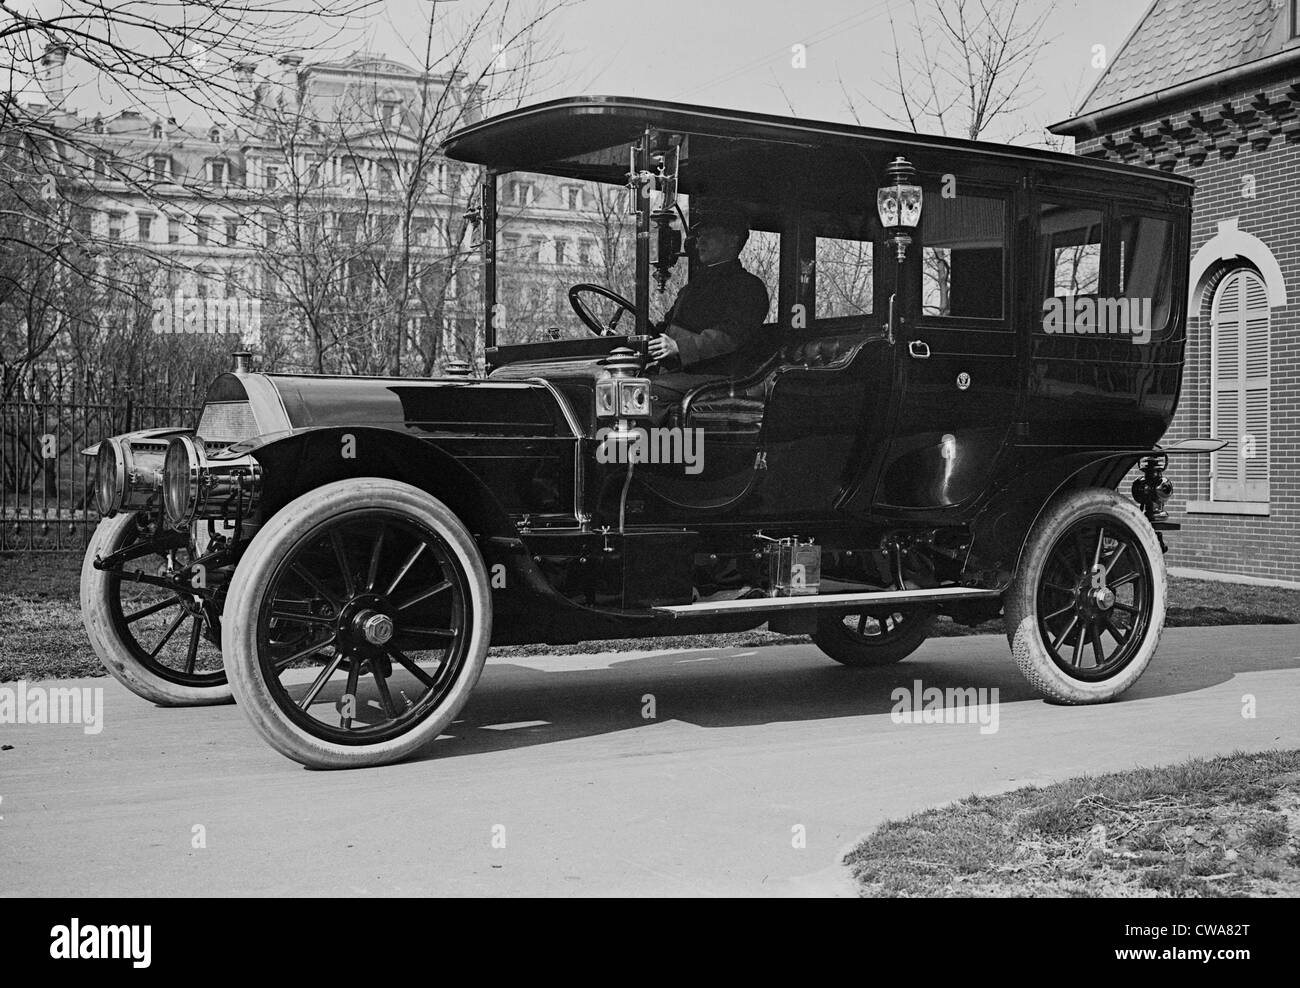 President Taft's 'Pierce Arrow,' a luxury auto with 6 cycle, that reached speeds near 50 mph.  Photo from 1909. Stock Photo